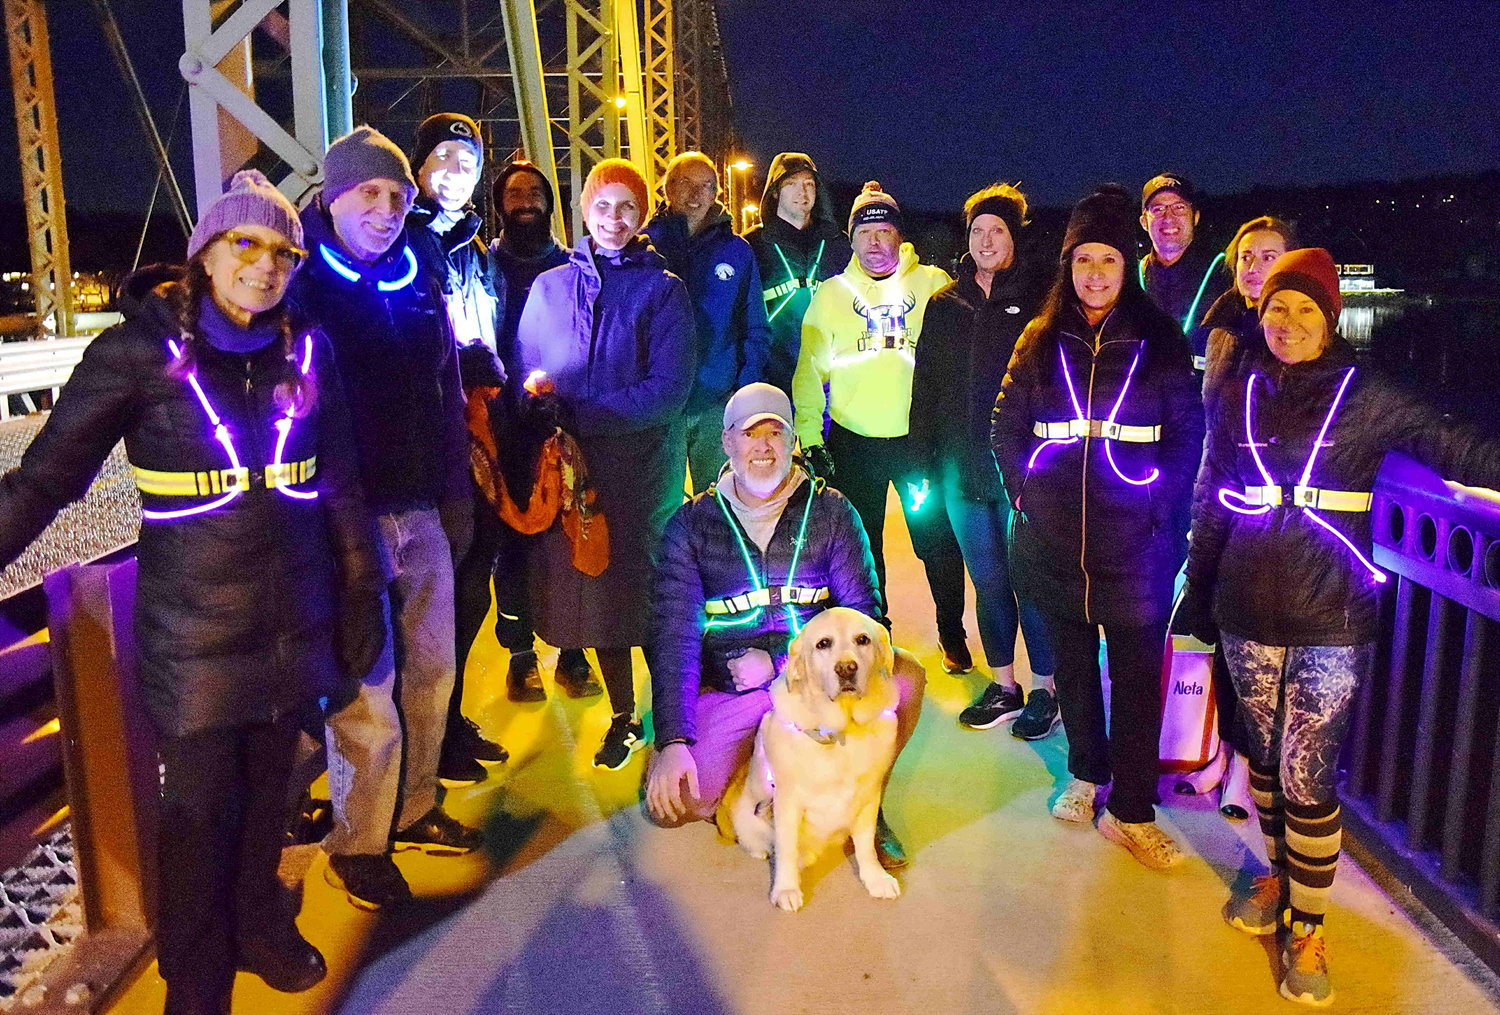 On this night, walkers wearing lights representing the global rare disease community lit up the New Hope-Lambertville Bridge wearing NoxGear, carrying glow sticks and flashlights.